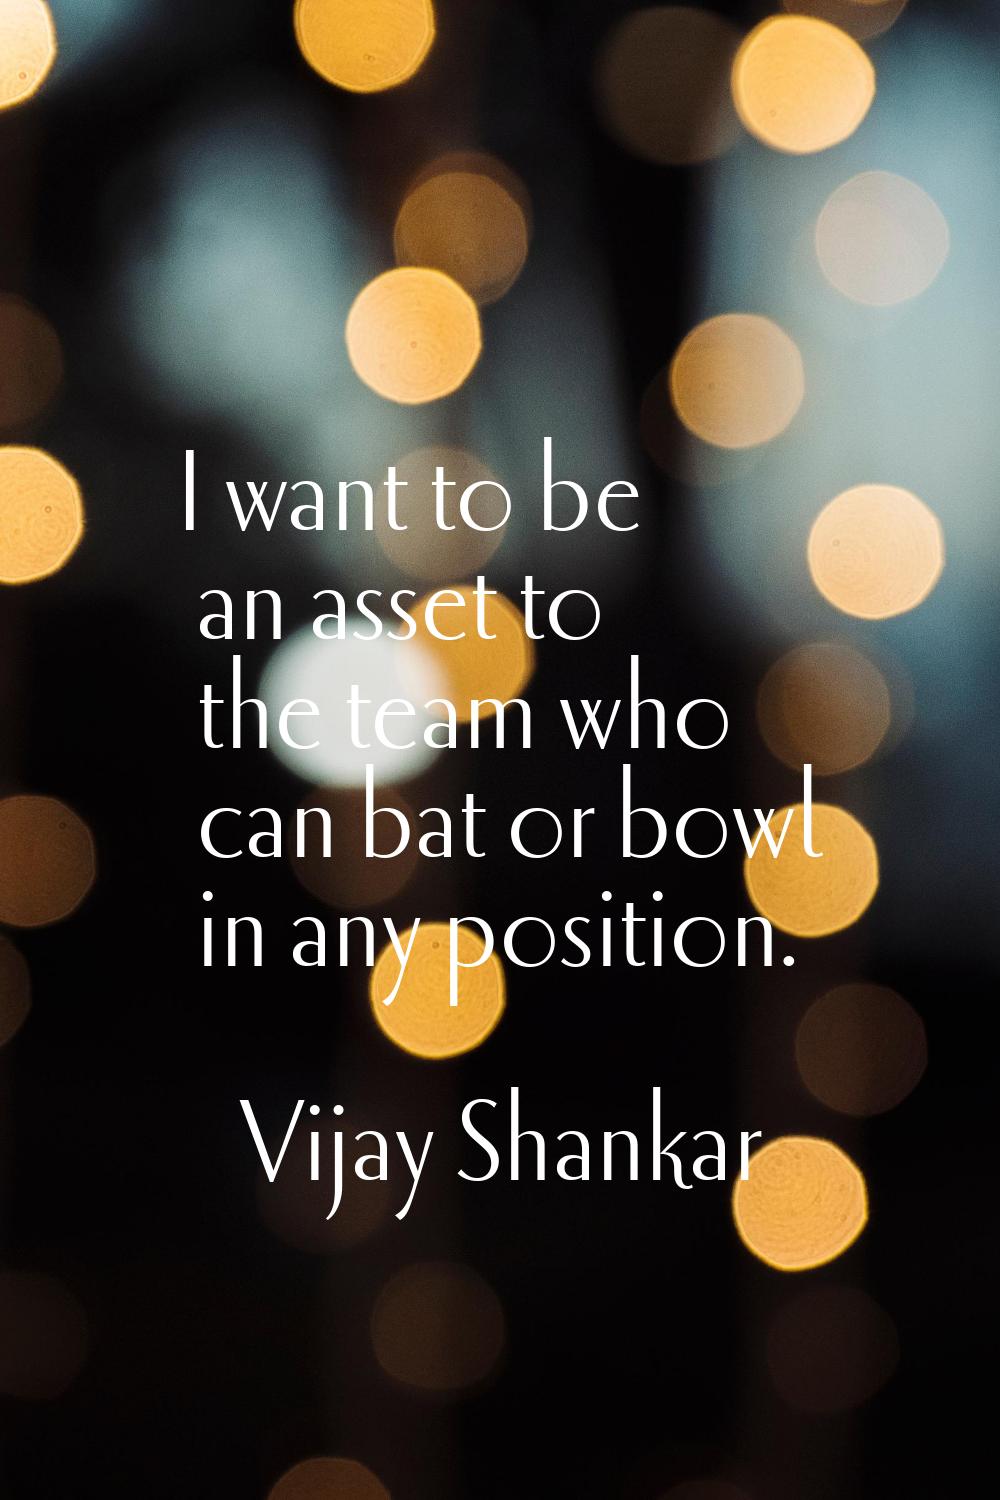 I want to be an asset to the team who can bat or bowl in any position.